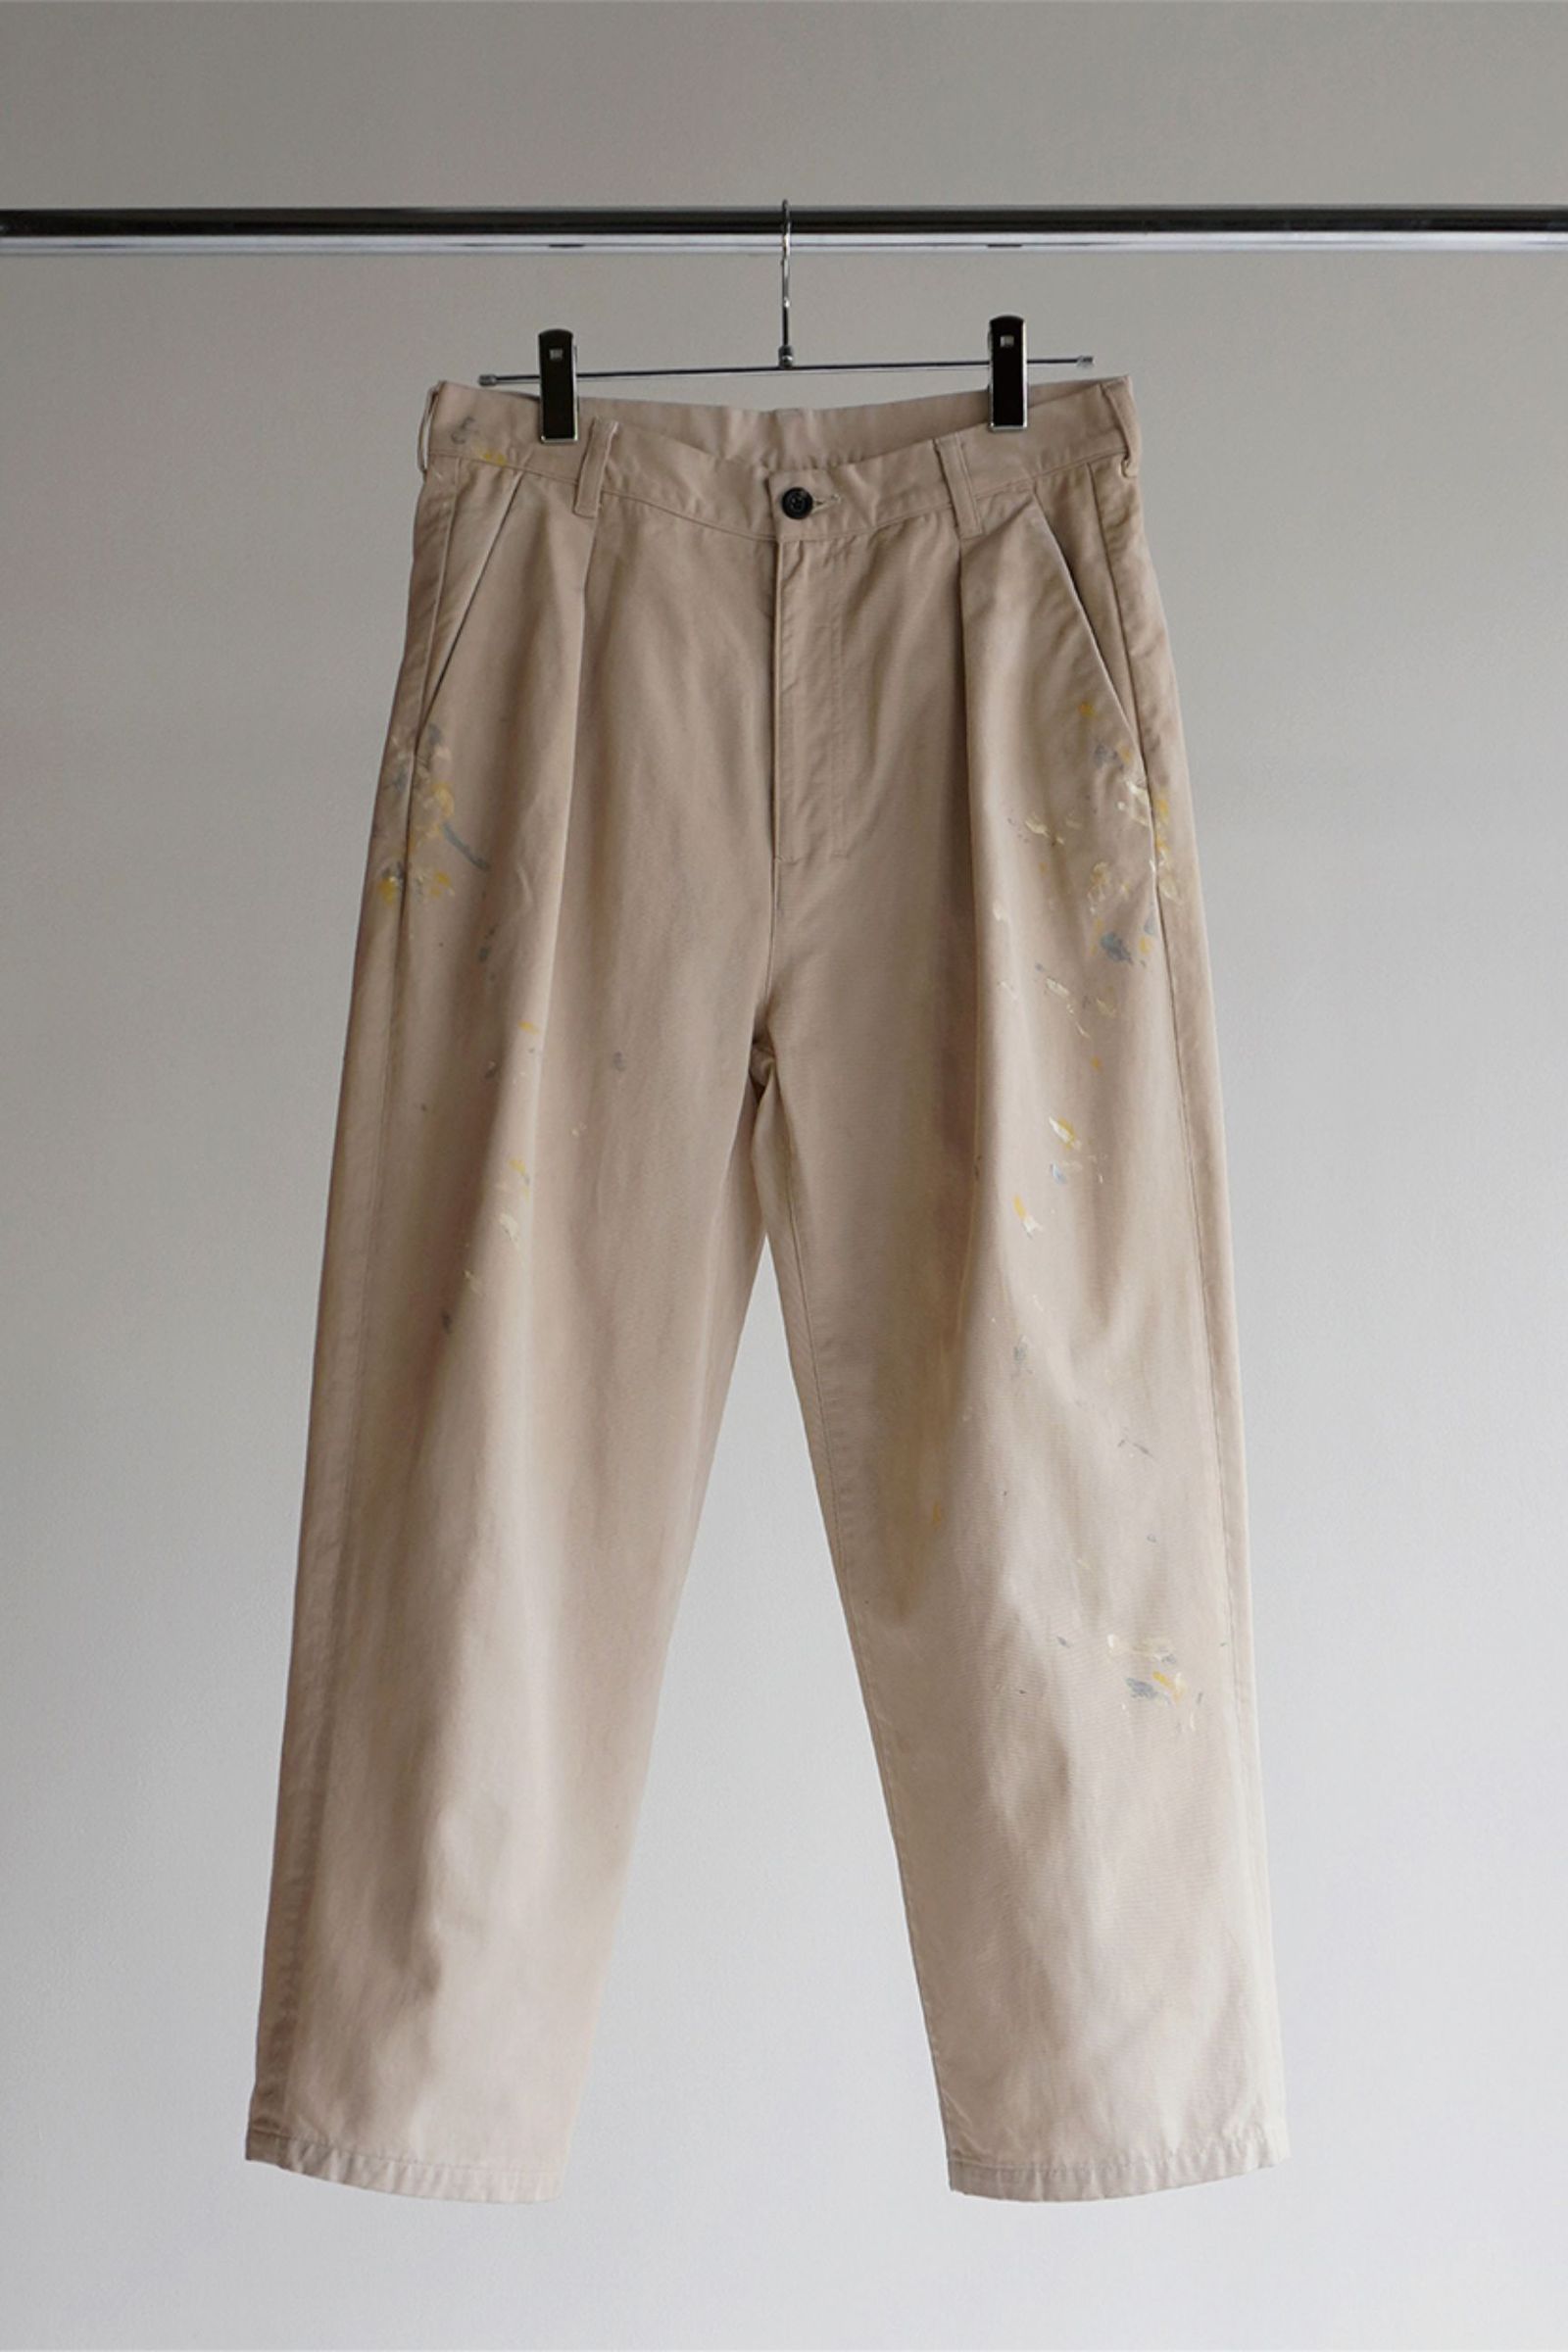 PAINT CHINO TROUSERSBEIGE ancellm